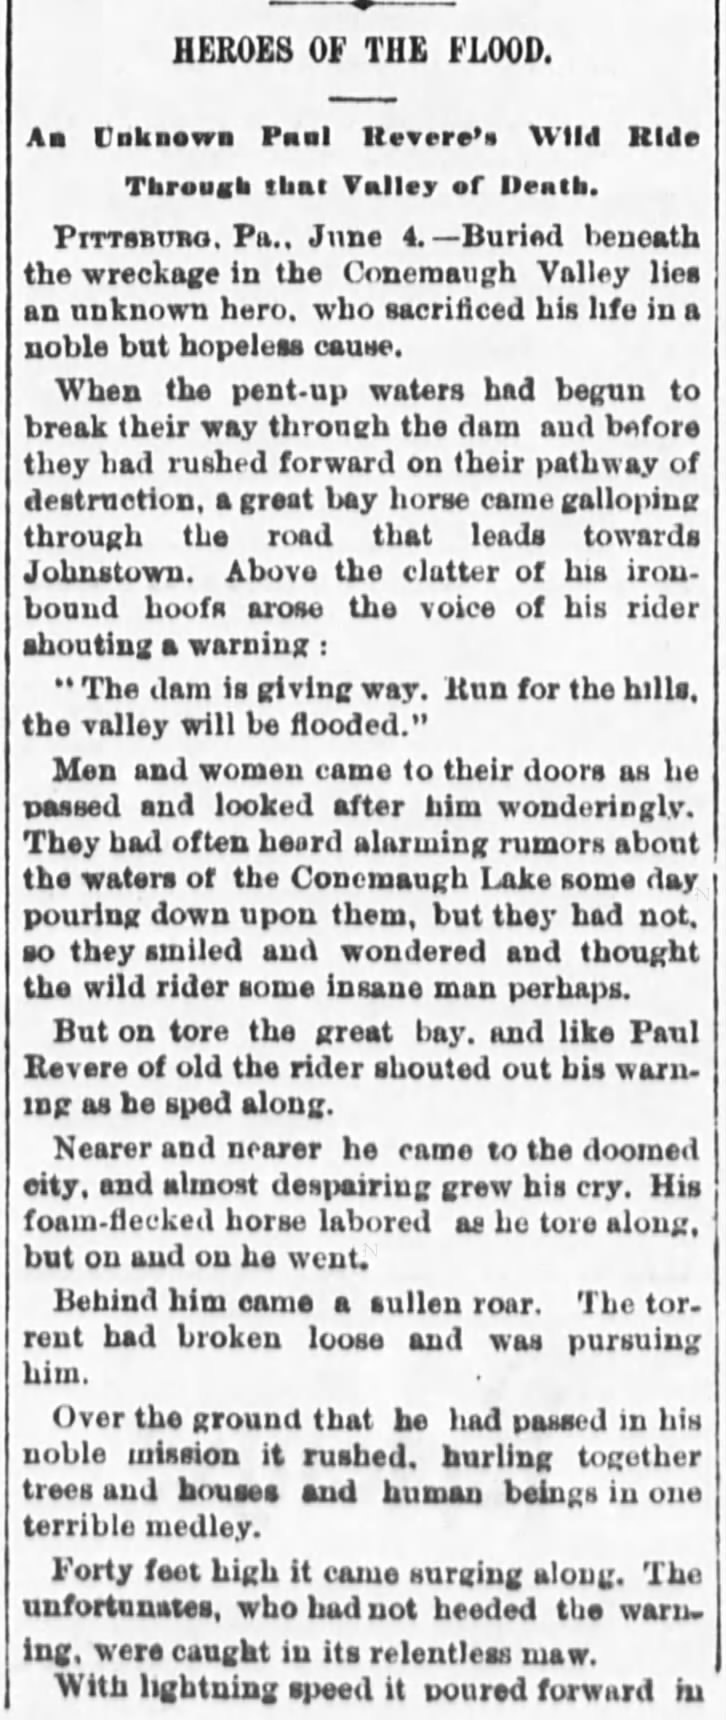 Sensationalized contemporary account of "Unknown Paul Revere's Wild Ride" to warn of flood (excerpt)